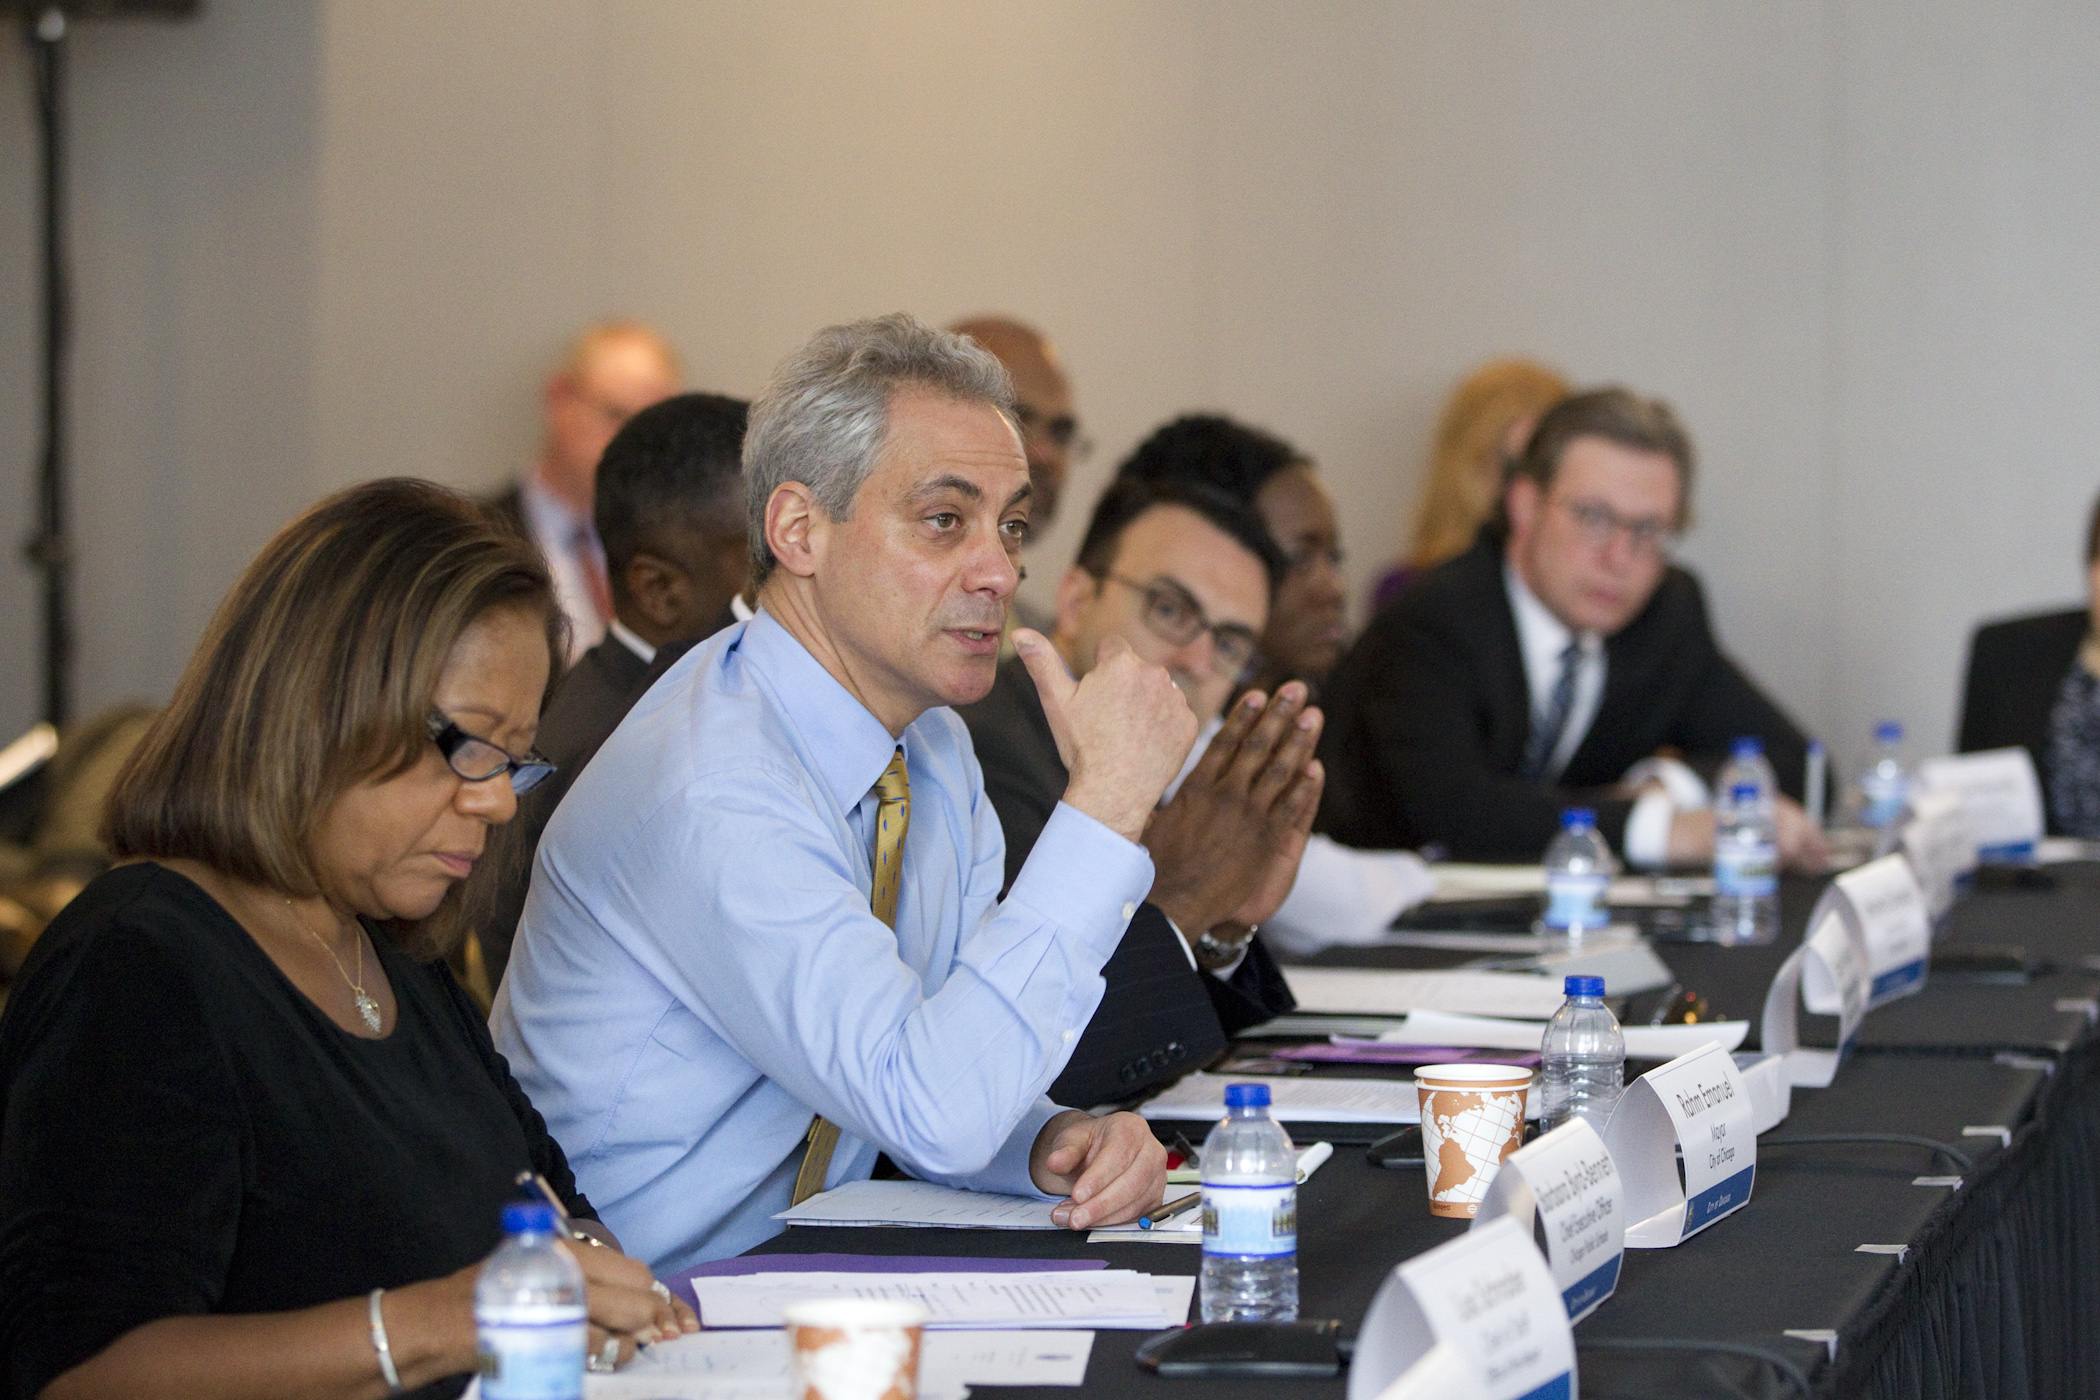 Mayor Emanuel convenes cabinet to discuss City-wide coordination to support Chicago’s students.